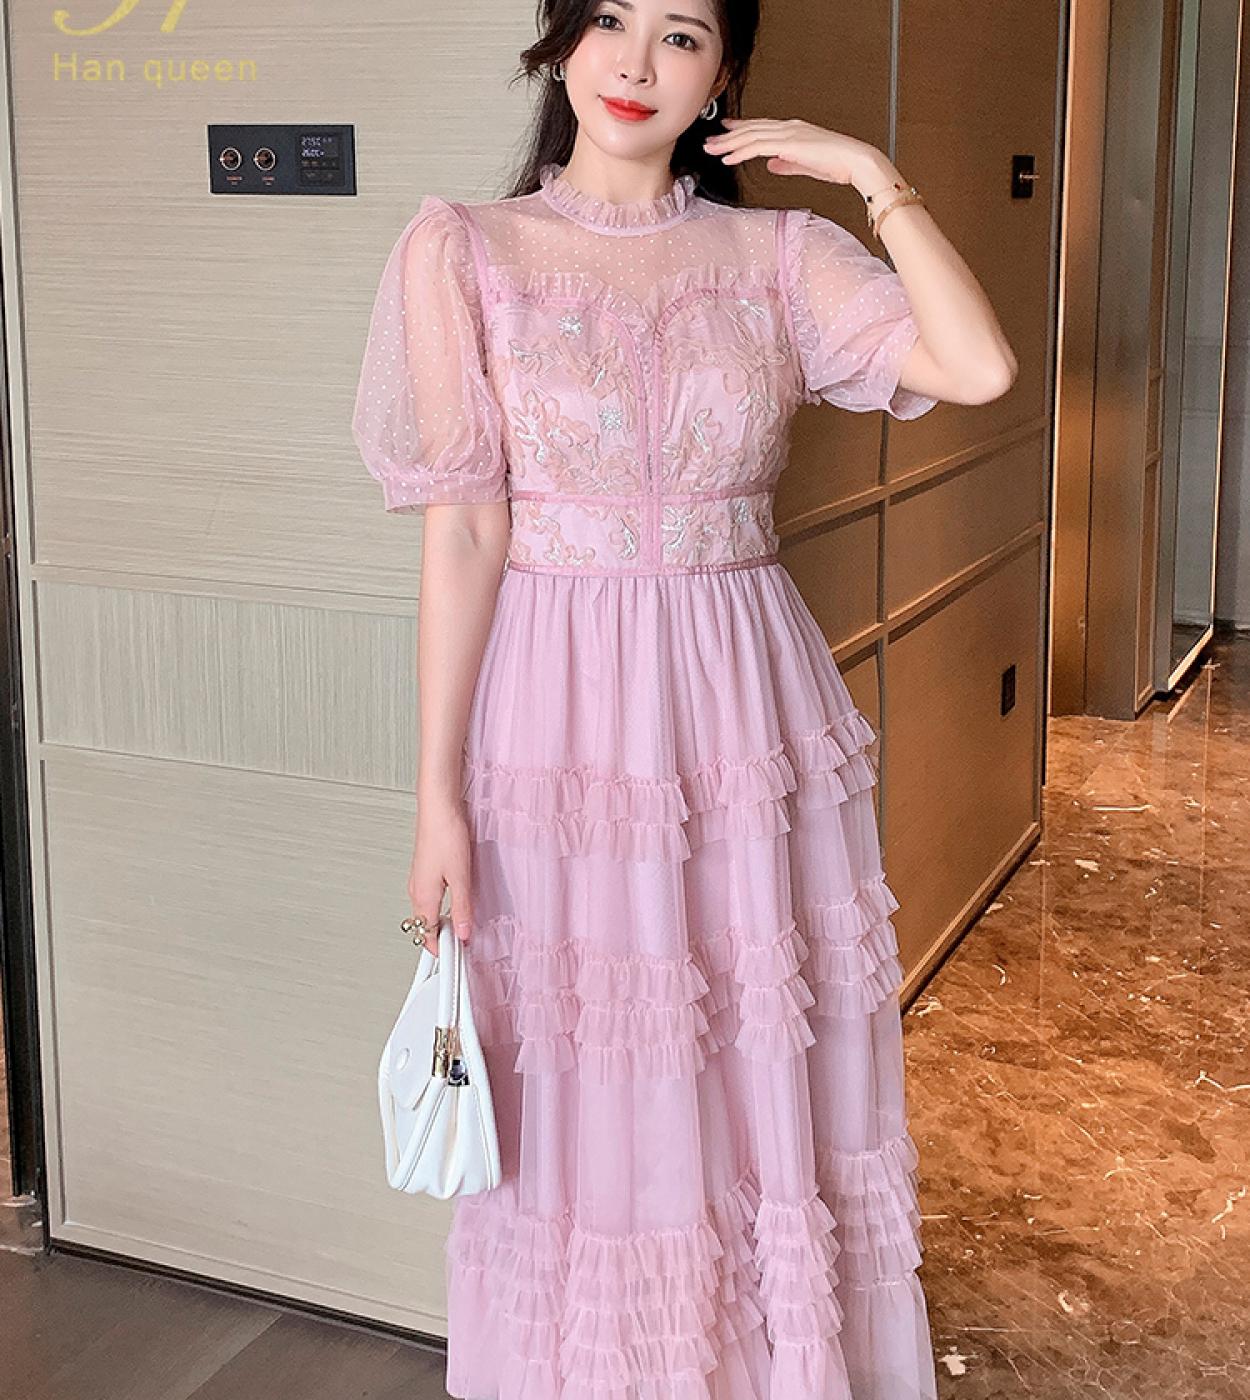 H Han Queen Hot Summer Dress 2022 Puff Sleeves Lace Paneled Mesh Cake Short Sleeve Crew Neck Casual Retro Pink Simple Mi